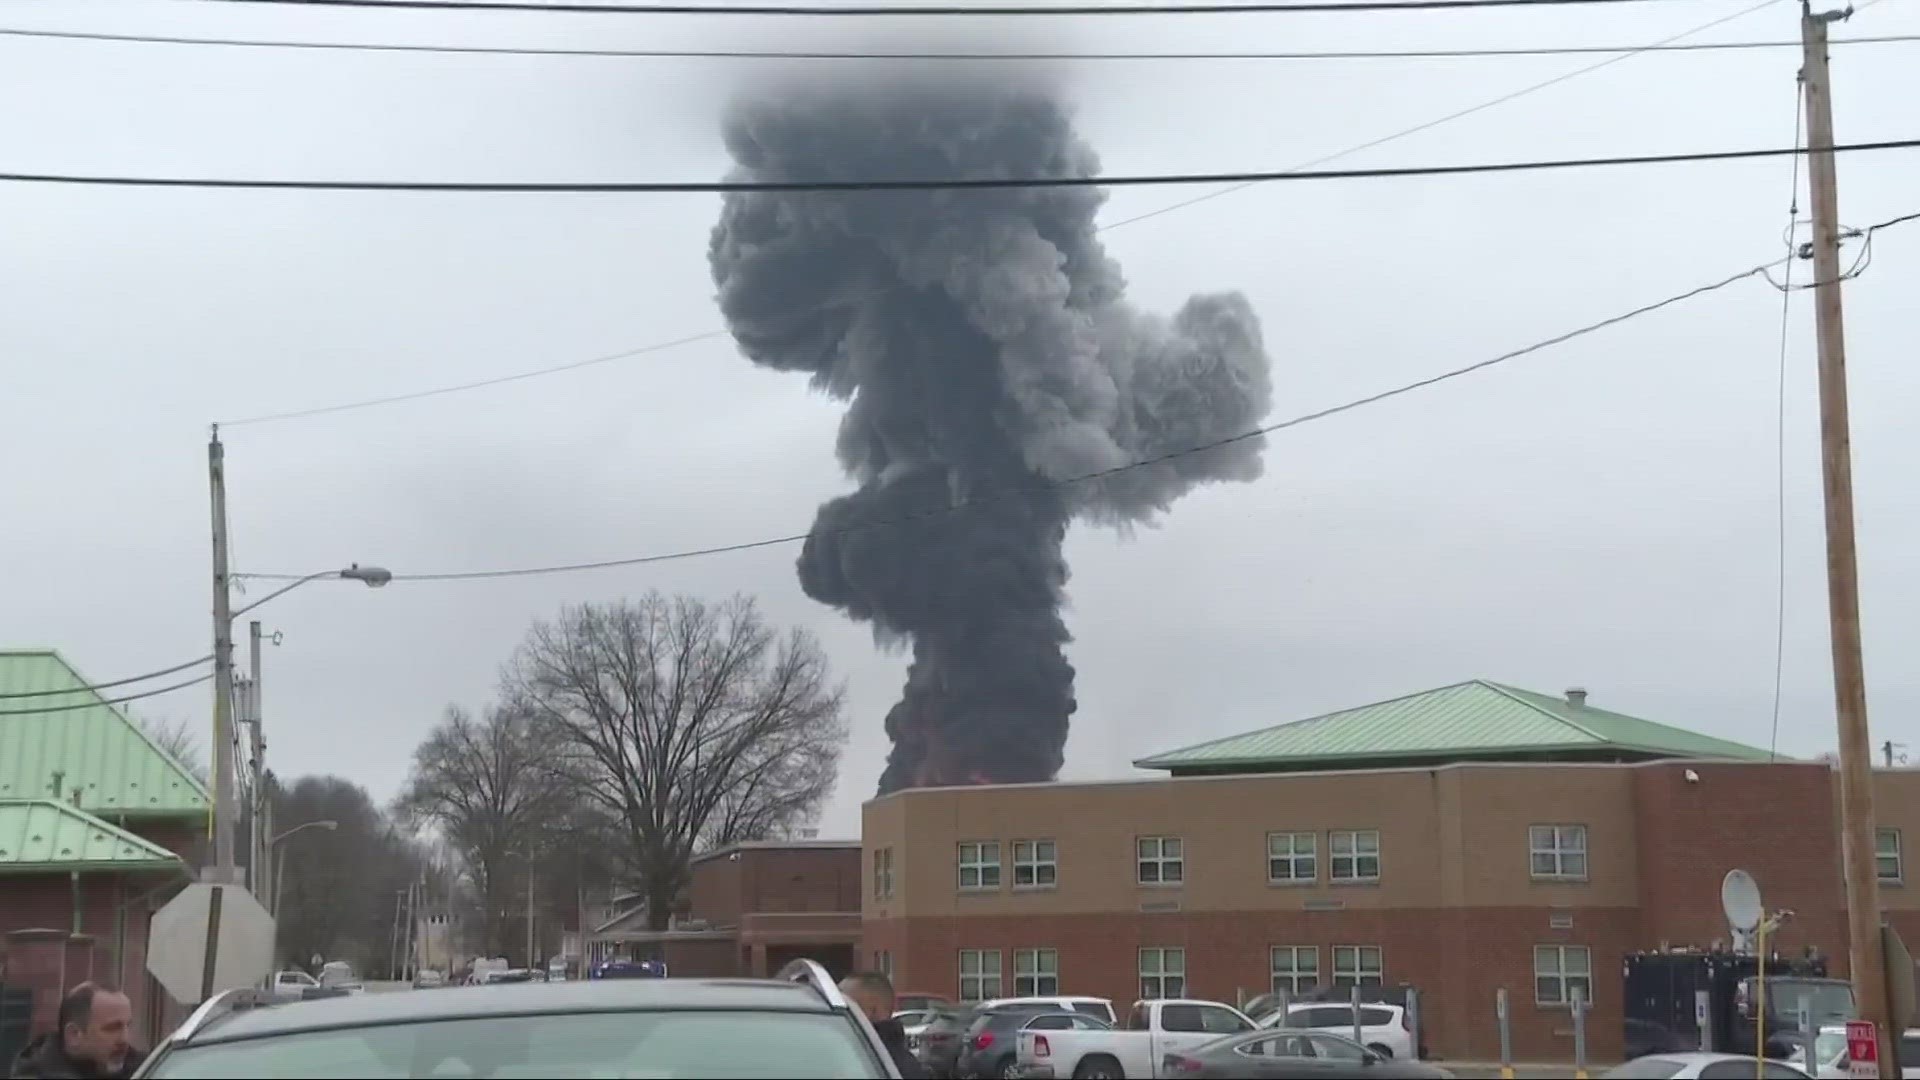 The NTSB is gathering sworn testimony about the Feb. 3 Norfolk Southern toxic train derailment, plus the subsequent hazardous material release and fires.